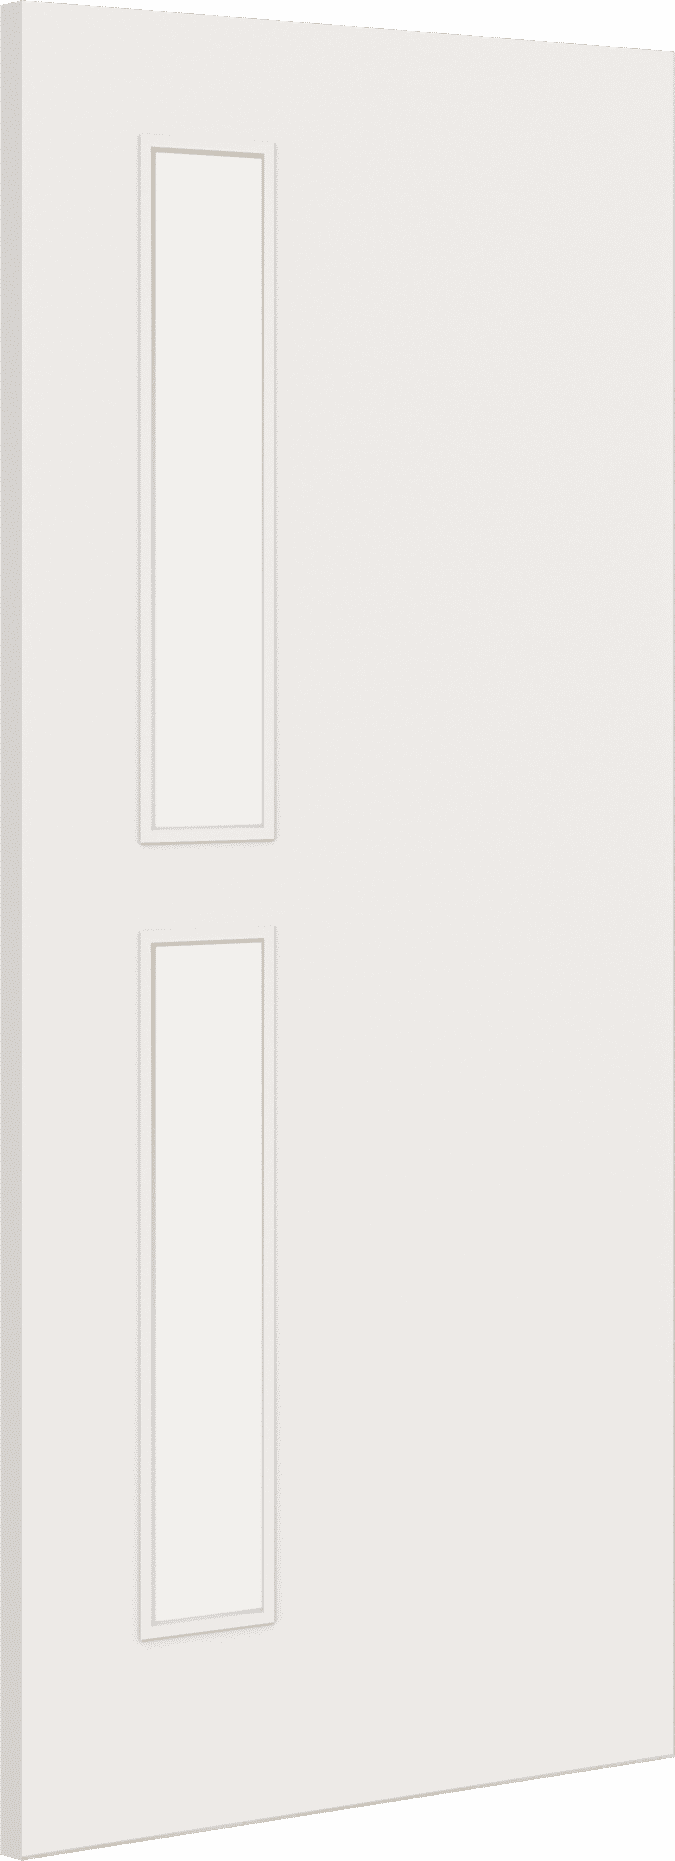 2040mm x 726mm x 44mm Architectural Paint Grade White 07 Clear Glazed Fire Door Blank